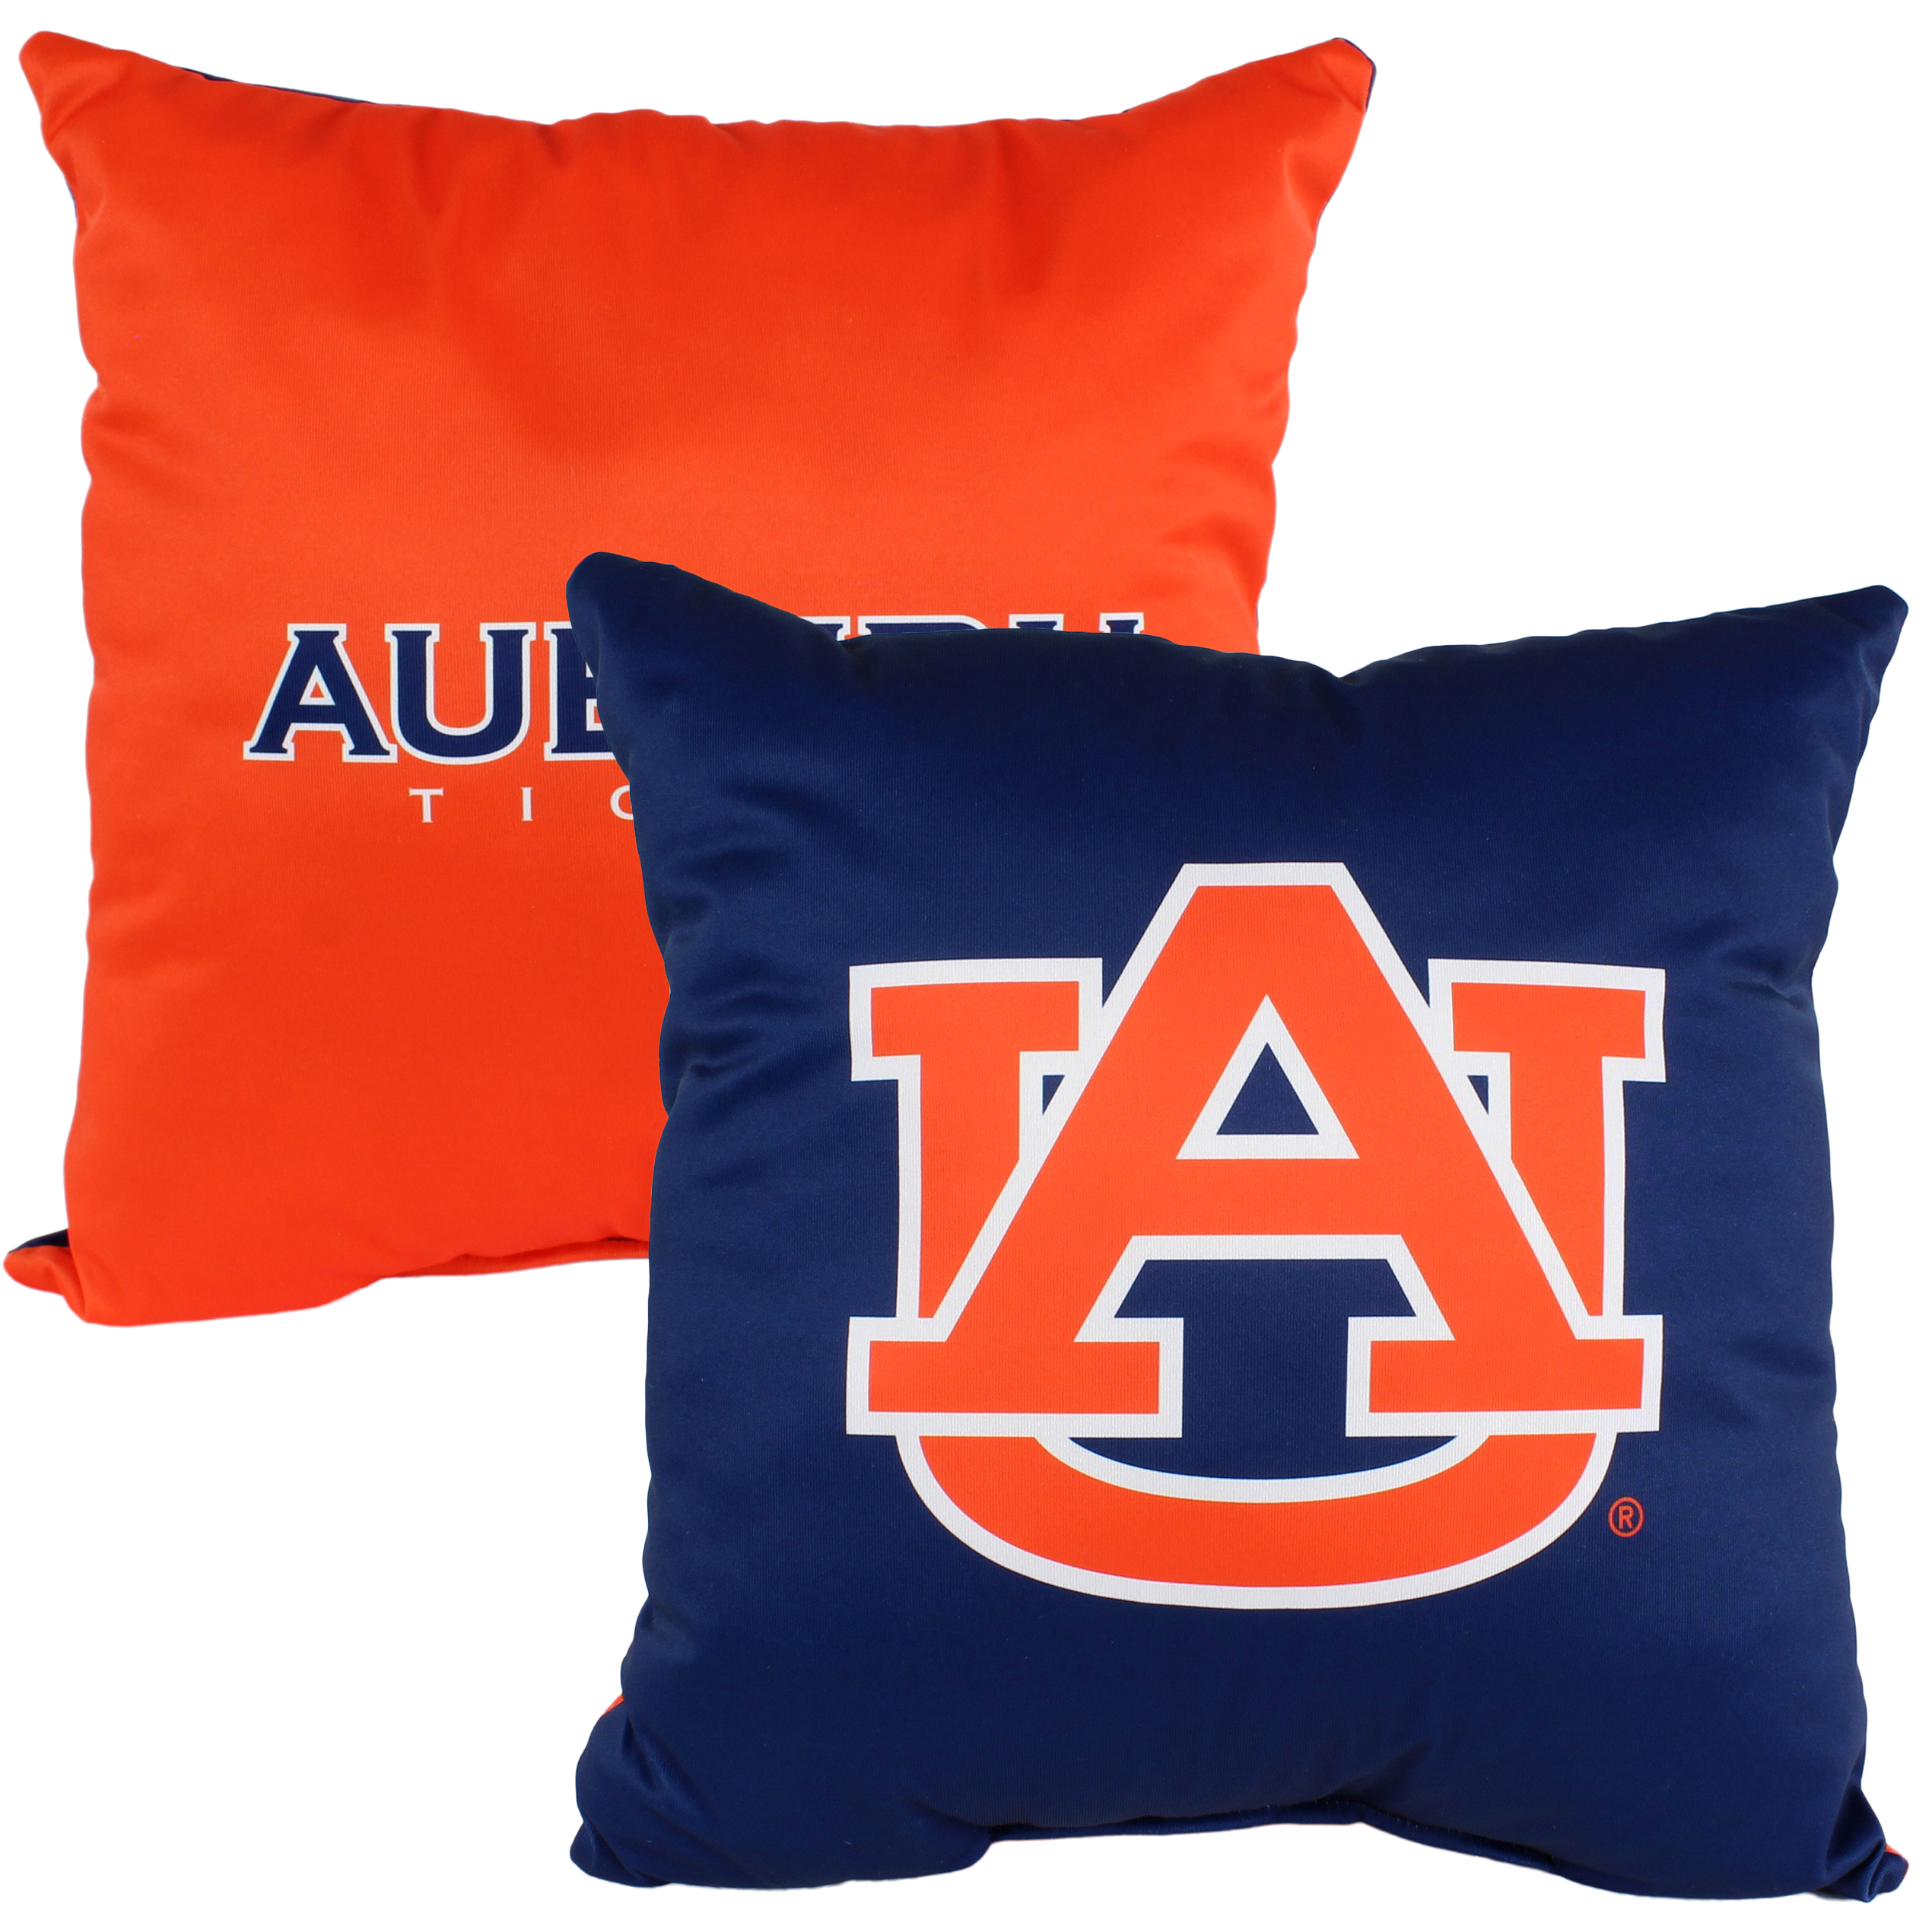 Auburn Tigers 16 inch Reversible Decorative Pillow - image 4 of 4